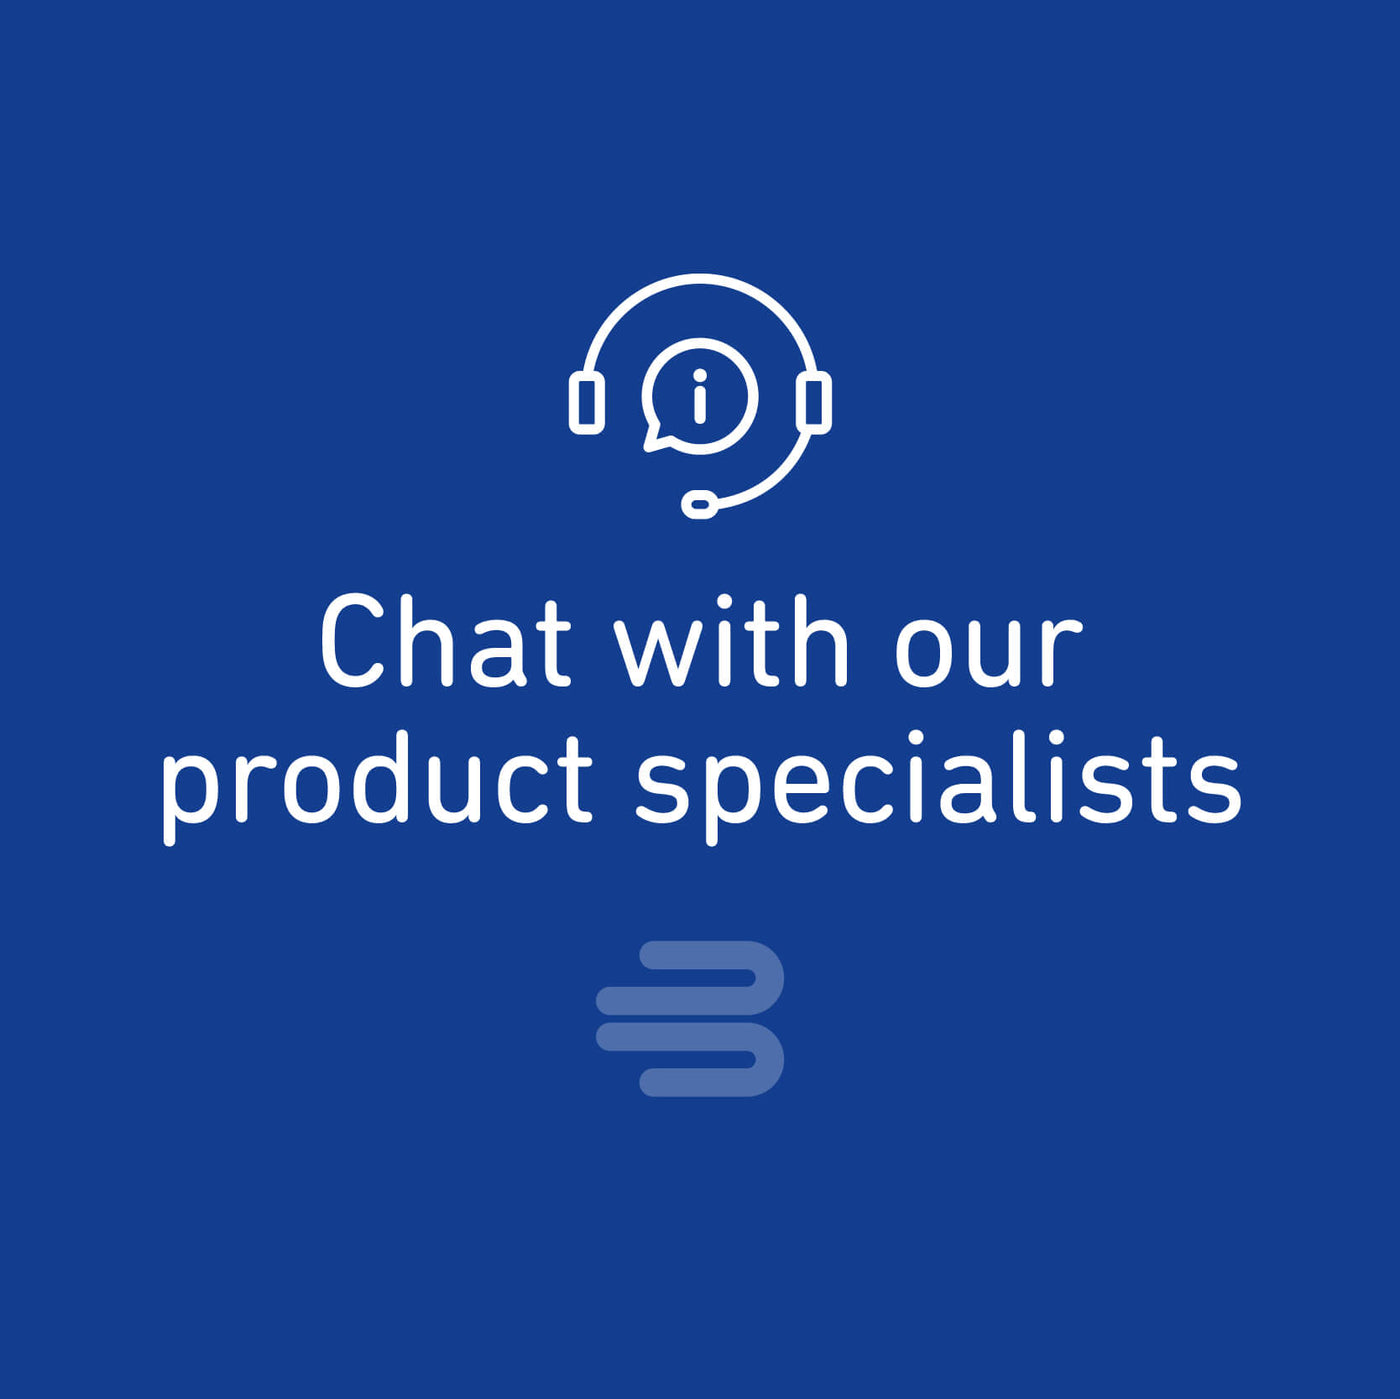 Contact Product Specialists